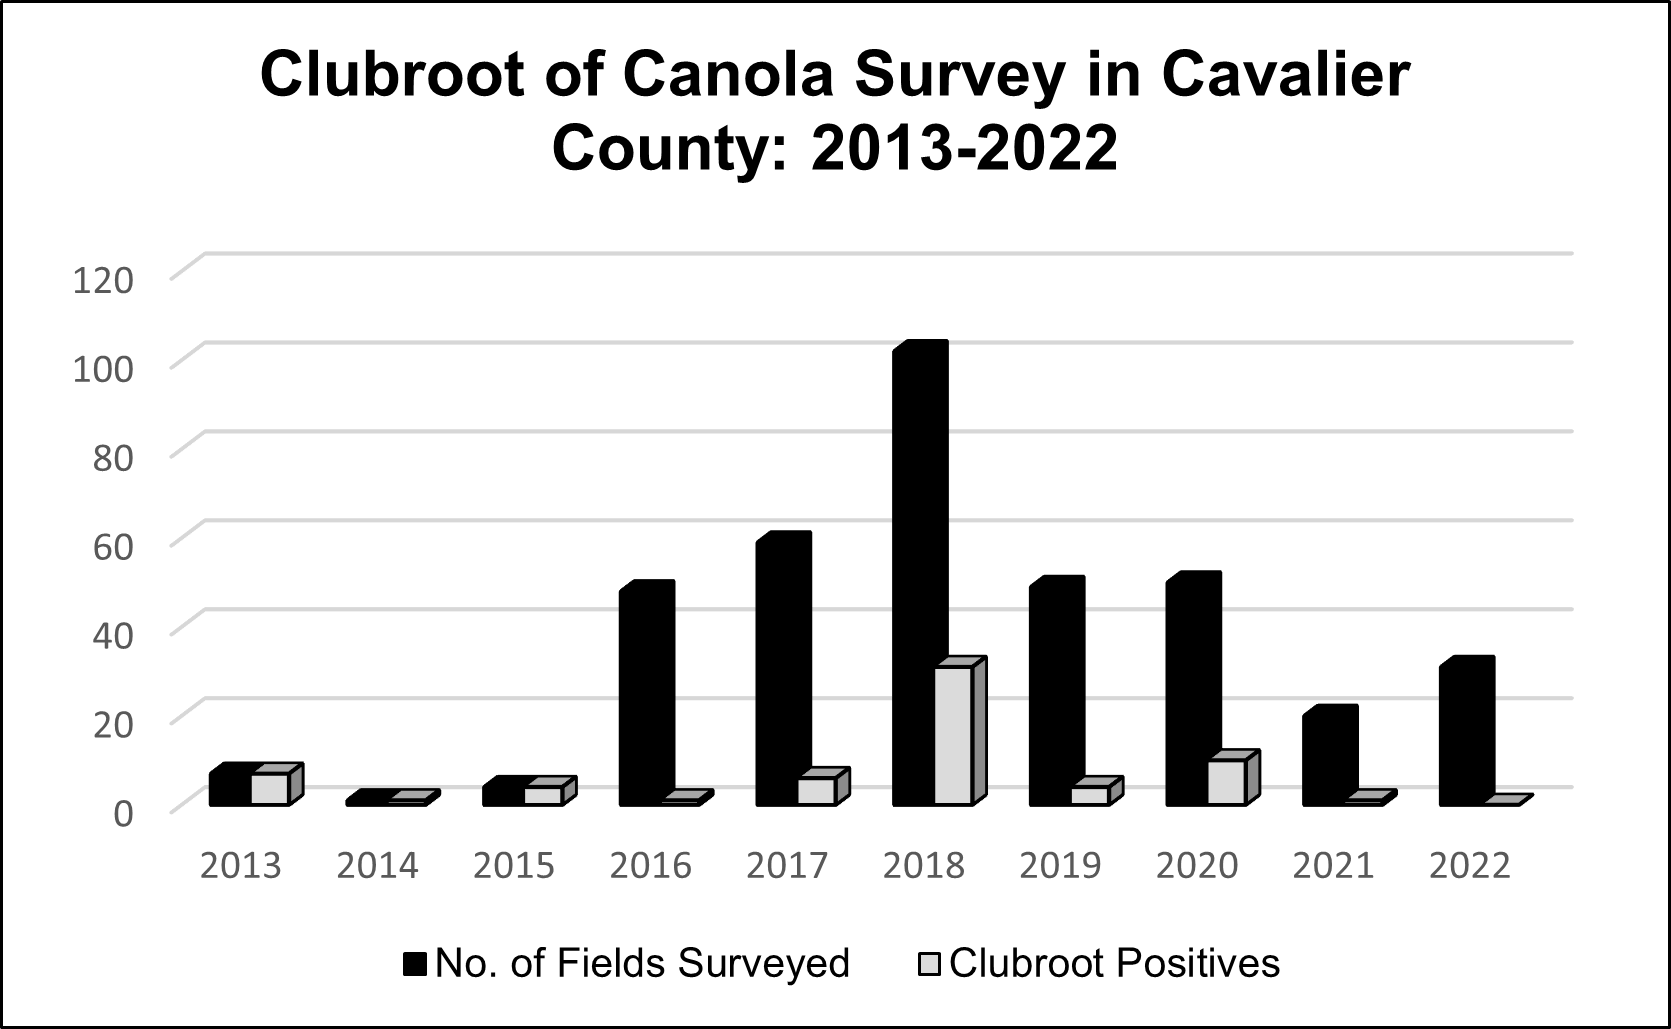 Chart showing the number of fields surveyed for clubroot from 2013 to 2022 in Cavalier County, North Dakota.